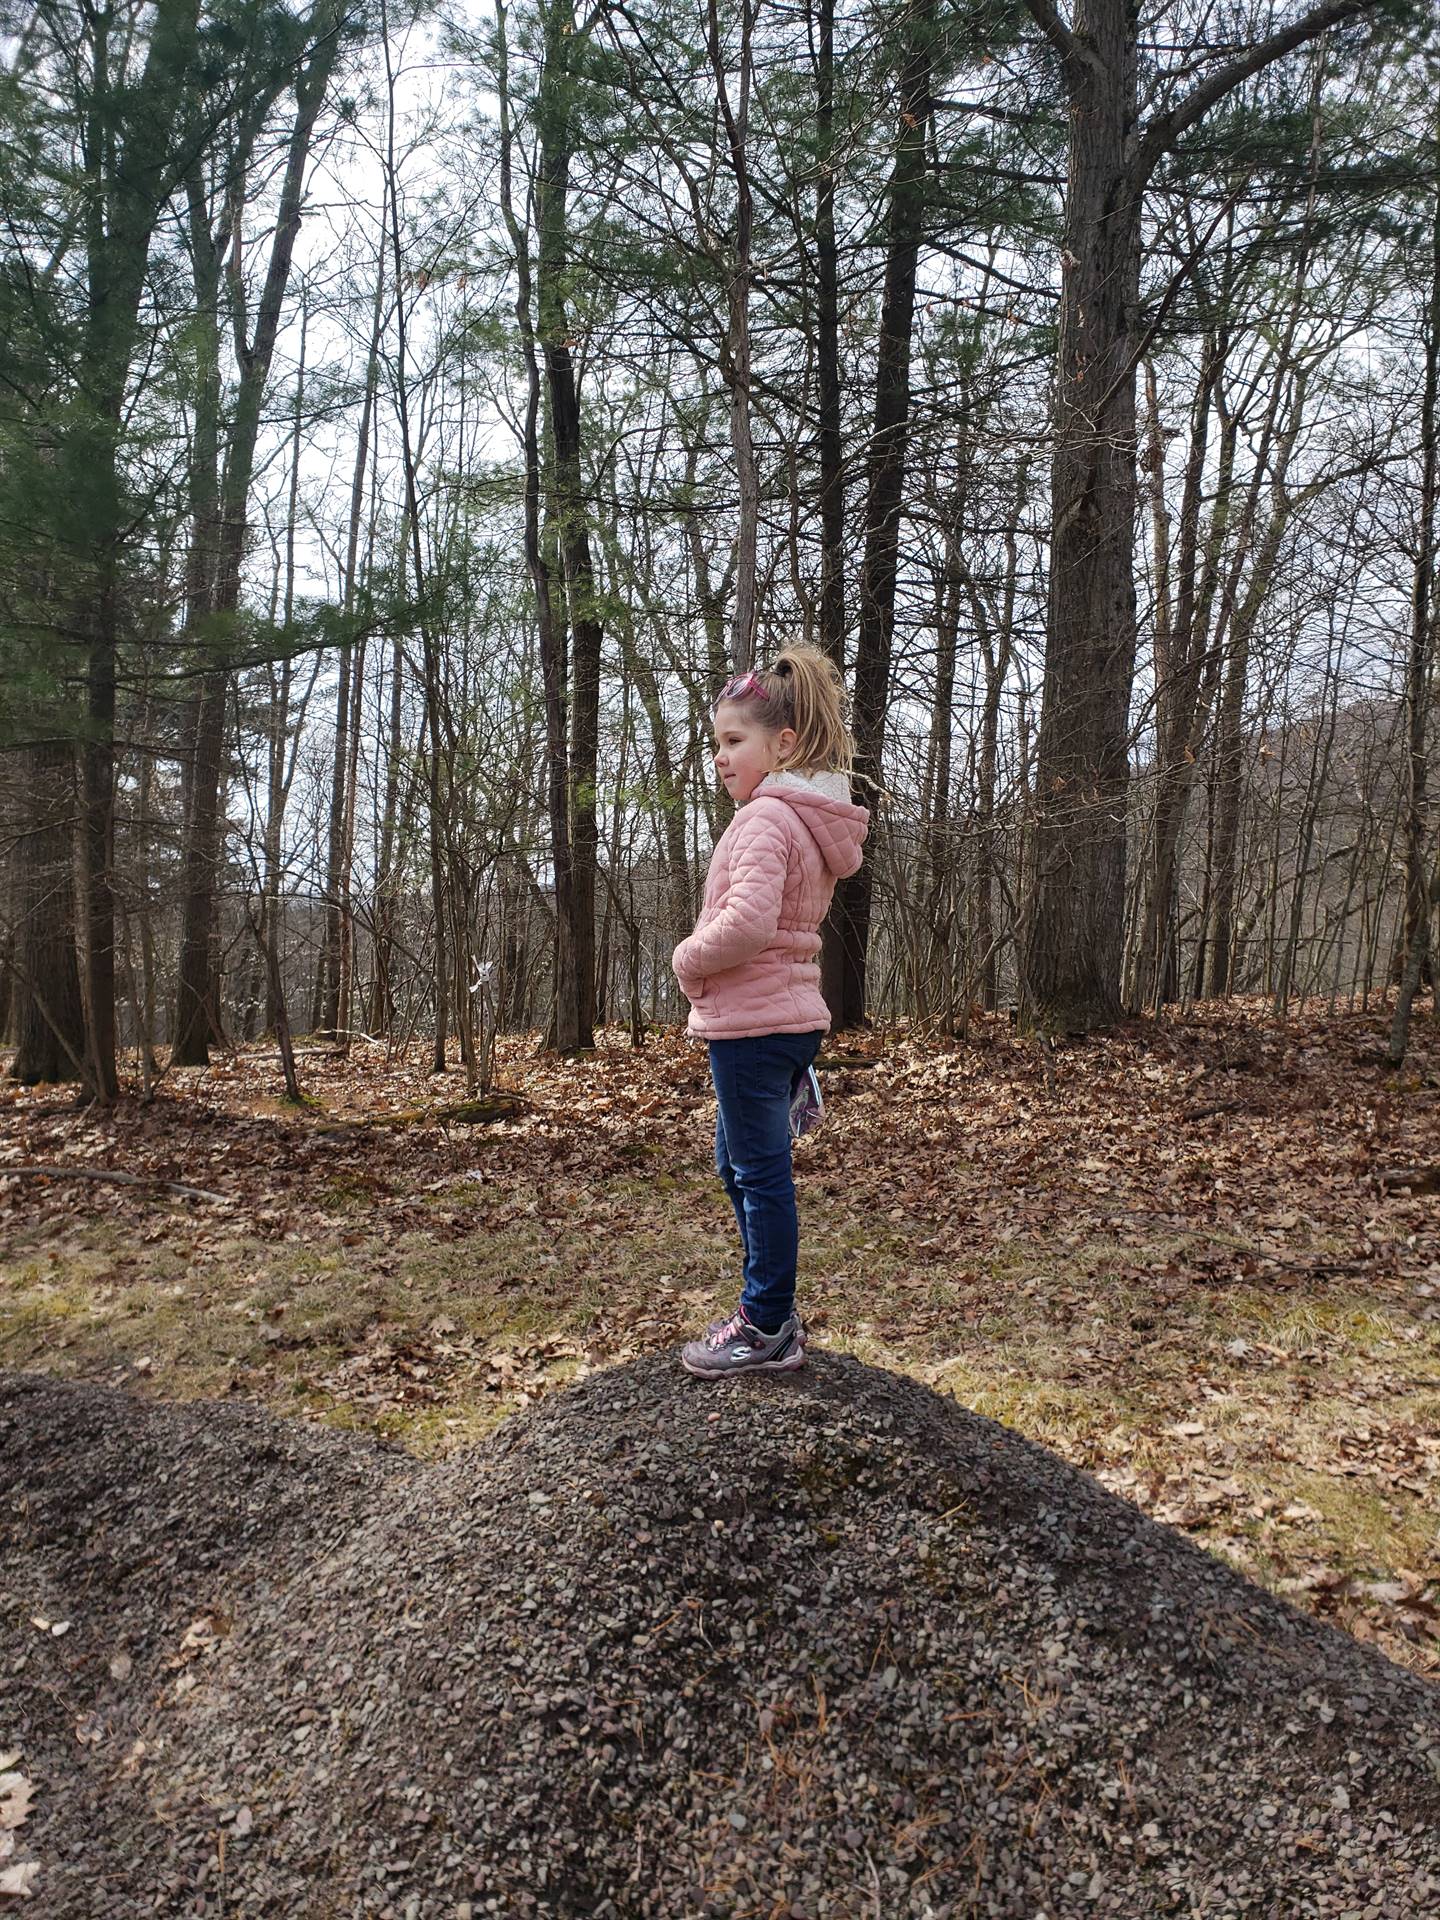 A child in the woods.